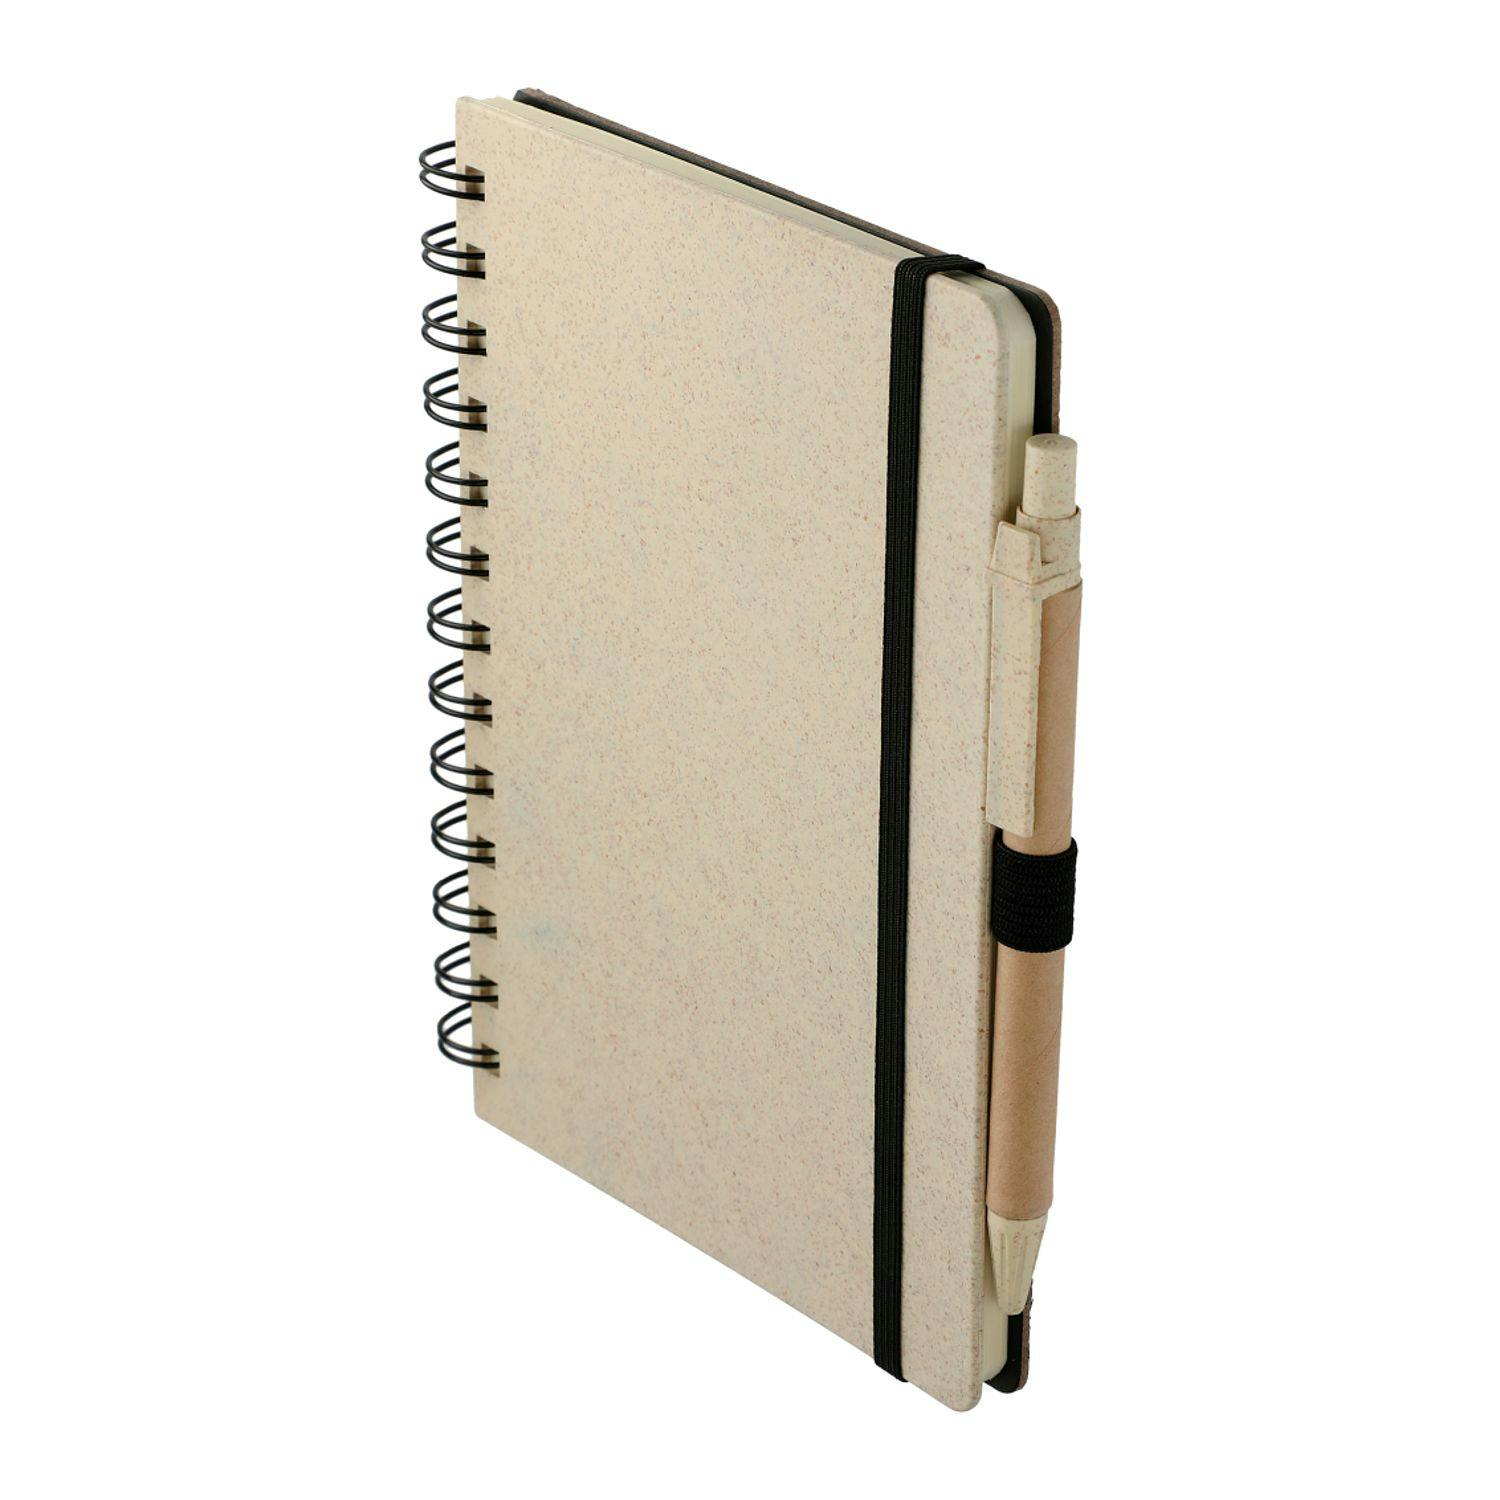 5" x 7" Wheat Straw Notebook With Pen - additional Image 2